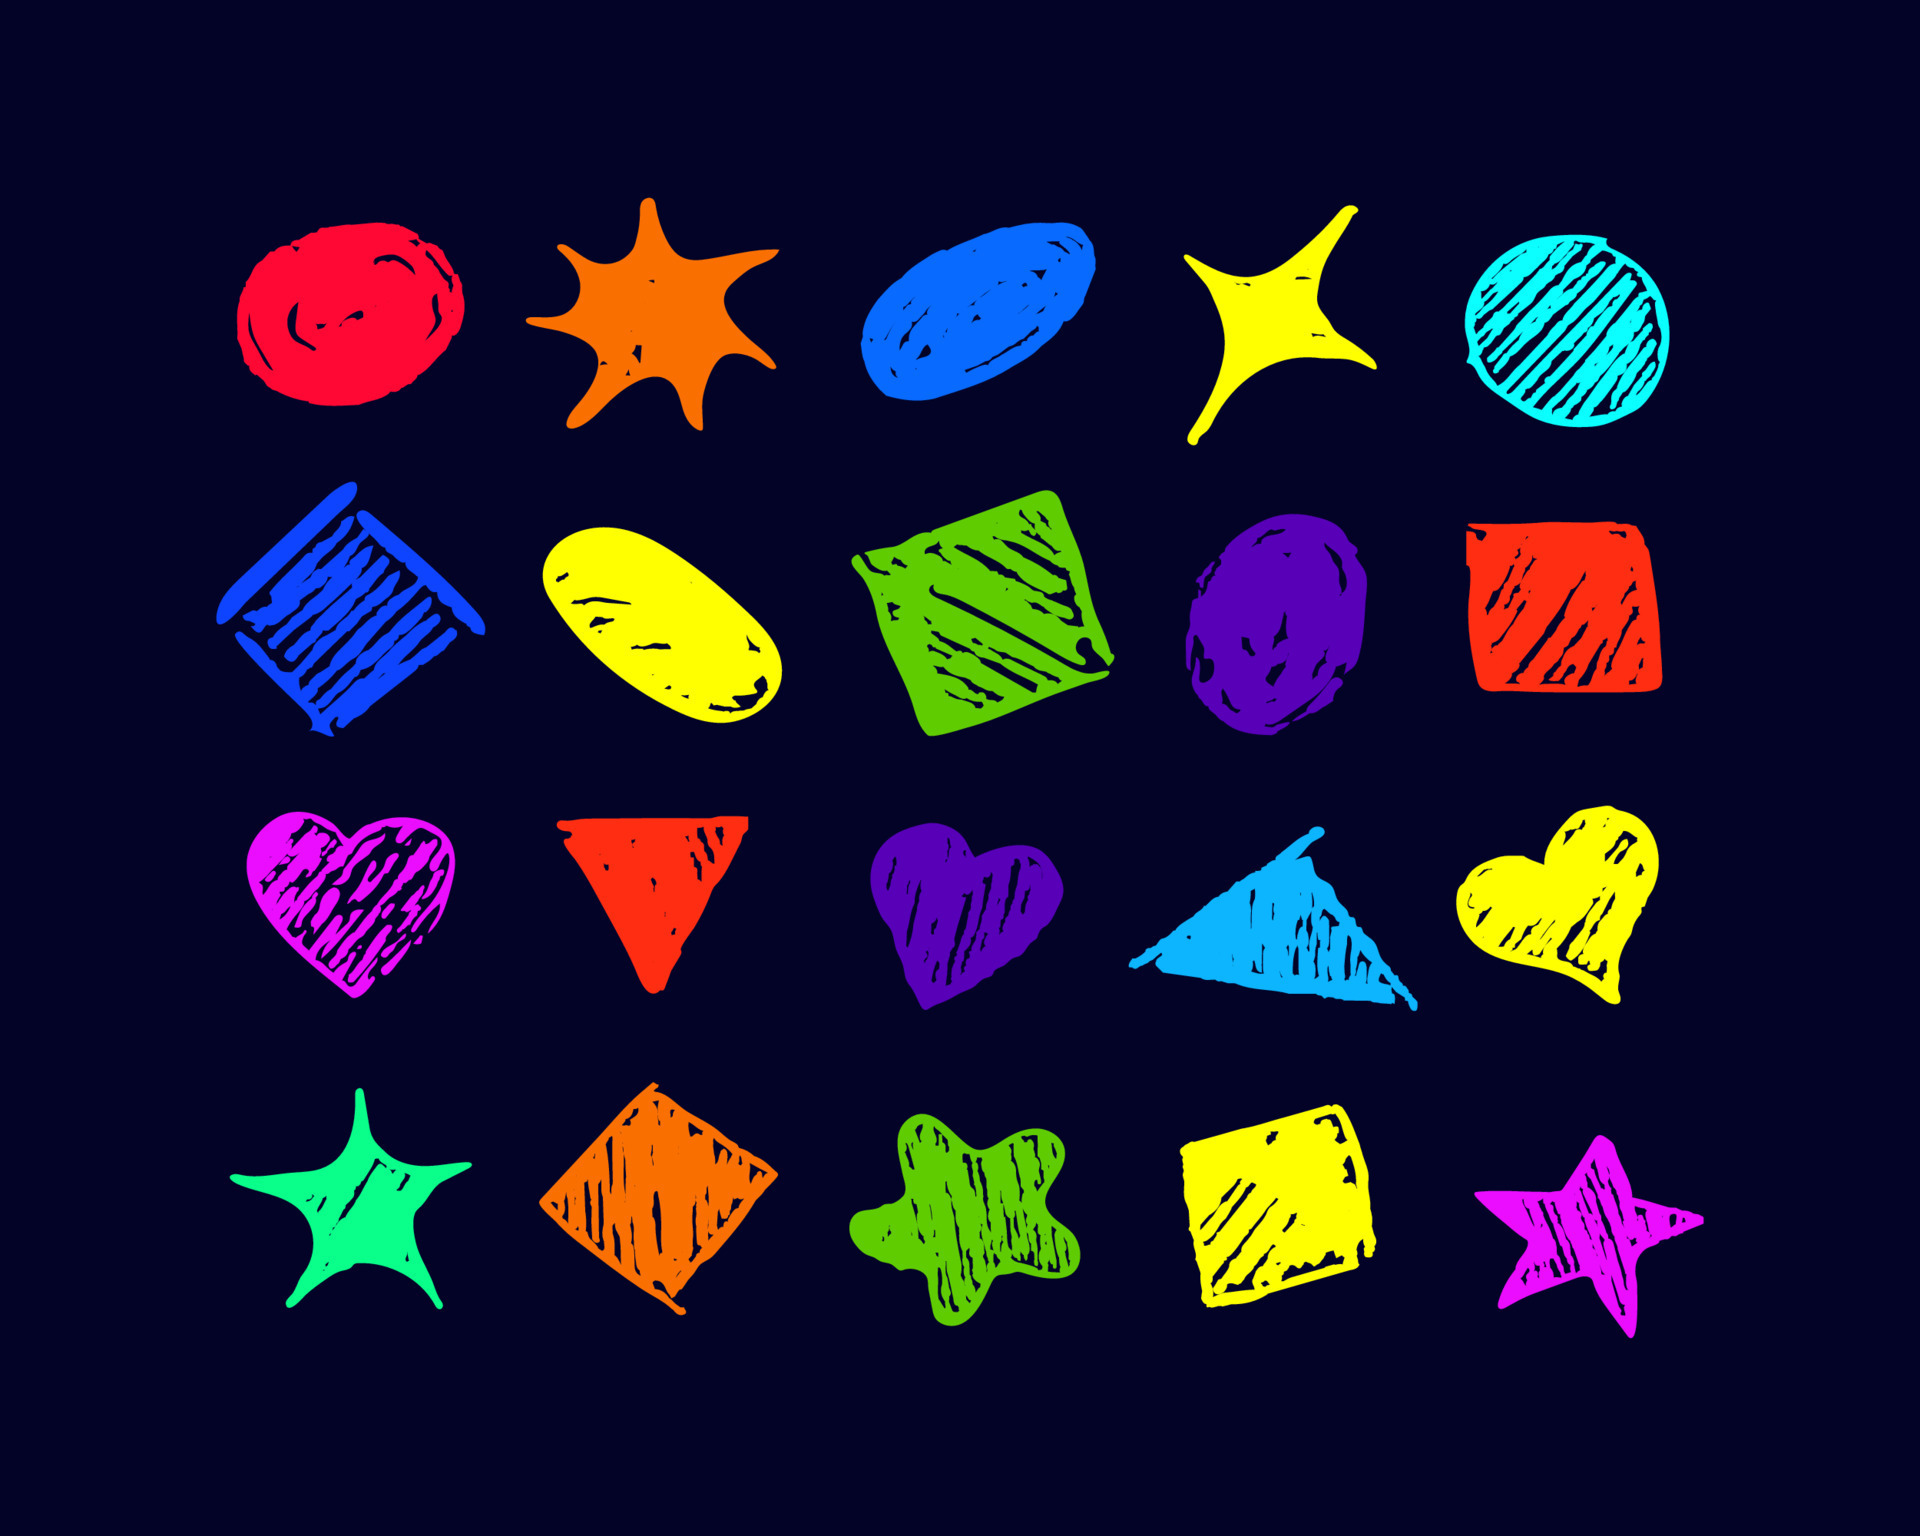 https://static.vecteezy.com/system/resources/previews/016/975/312/original/colorful-felt-tip-pen-shapes-figures-conversation-balloons-backgrounds-collection-of-doodles-hand-drawn-highlighter-elements-for-reminder-logo-bullet-journal-planner-school-and-business-vector.jpg